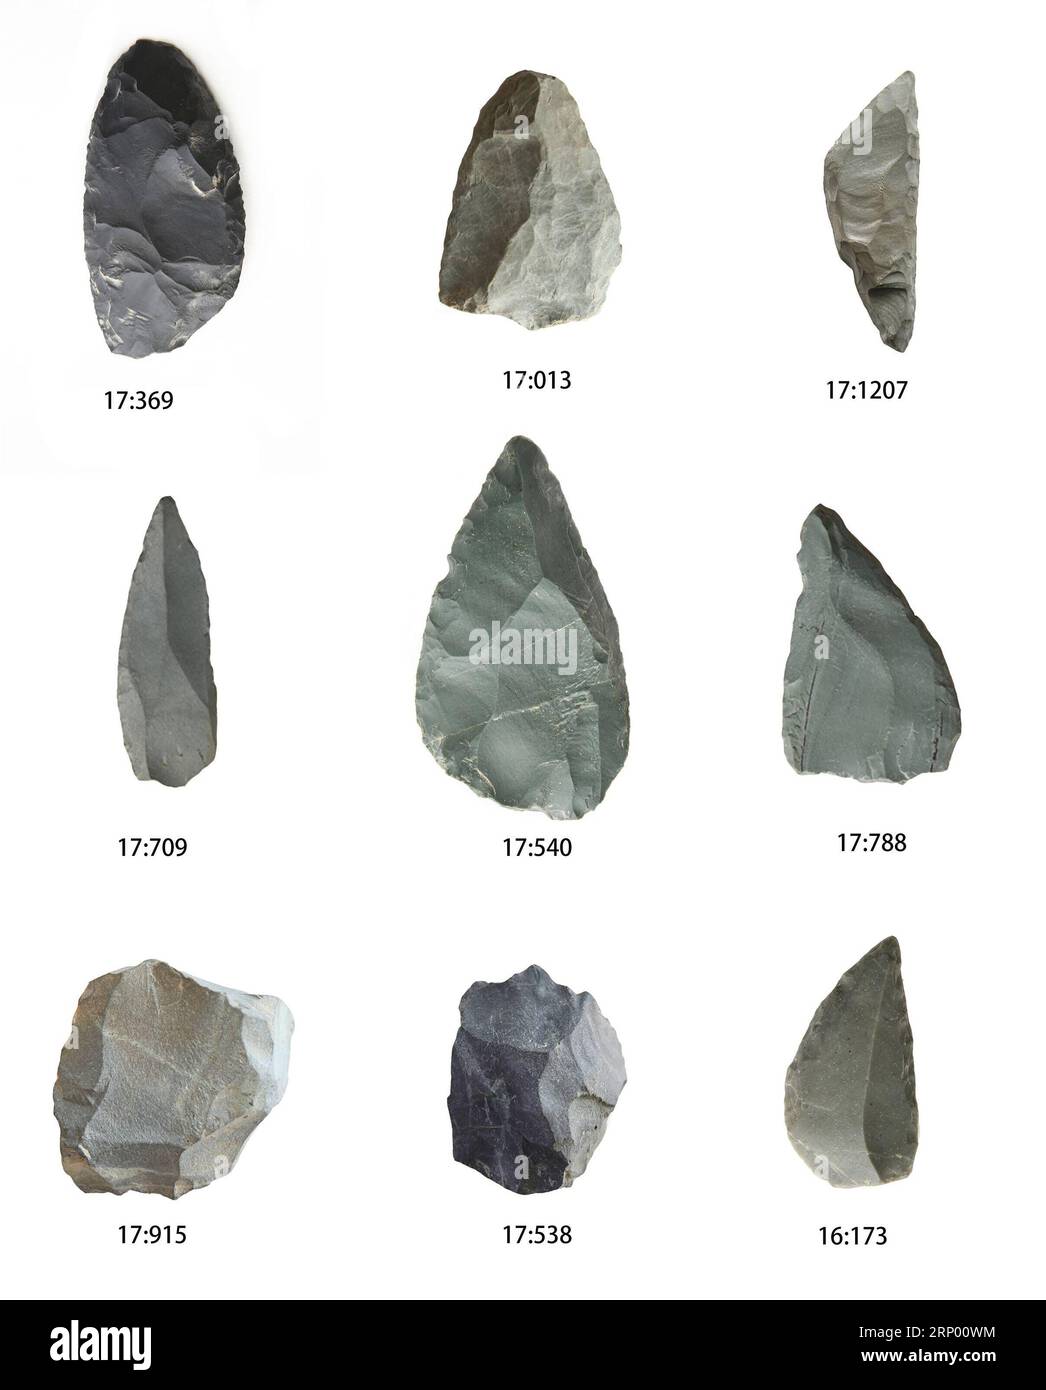 (180411) -- BEIJING, April 11, 2018 () -- File photo shows a stone tool assemblage unearthed from Tongtiandong cave site in northwest China s Xinjiang Uygur Autonomous Region. It is the first Paleolithic cave site found in Xinjiang. Chinese archaeologists have selected the top 10 archaeological discoveries in China in 2017, which were published by the China Archaeological Society and a newspaper sponsored by the State Administration of Cultural Heritage on Tuesday. ()(mcg) CHINA-TOP 10 ARCHAEOLOGICAL FINDS-2017 (CN) XINHUA PUBLICATIONxNOTxINxCHN Stock Photo